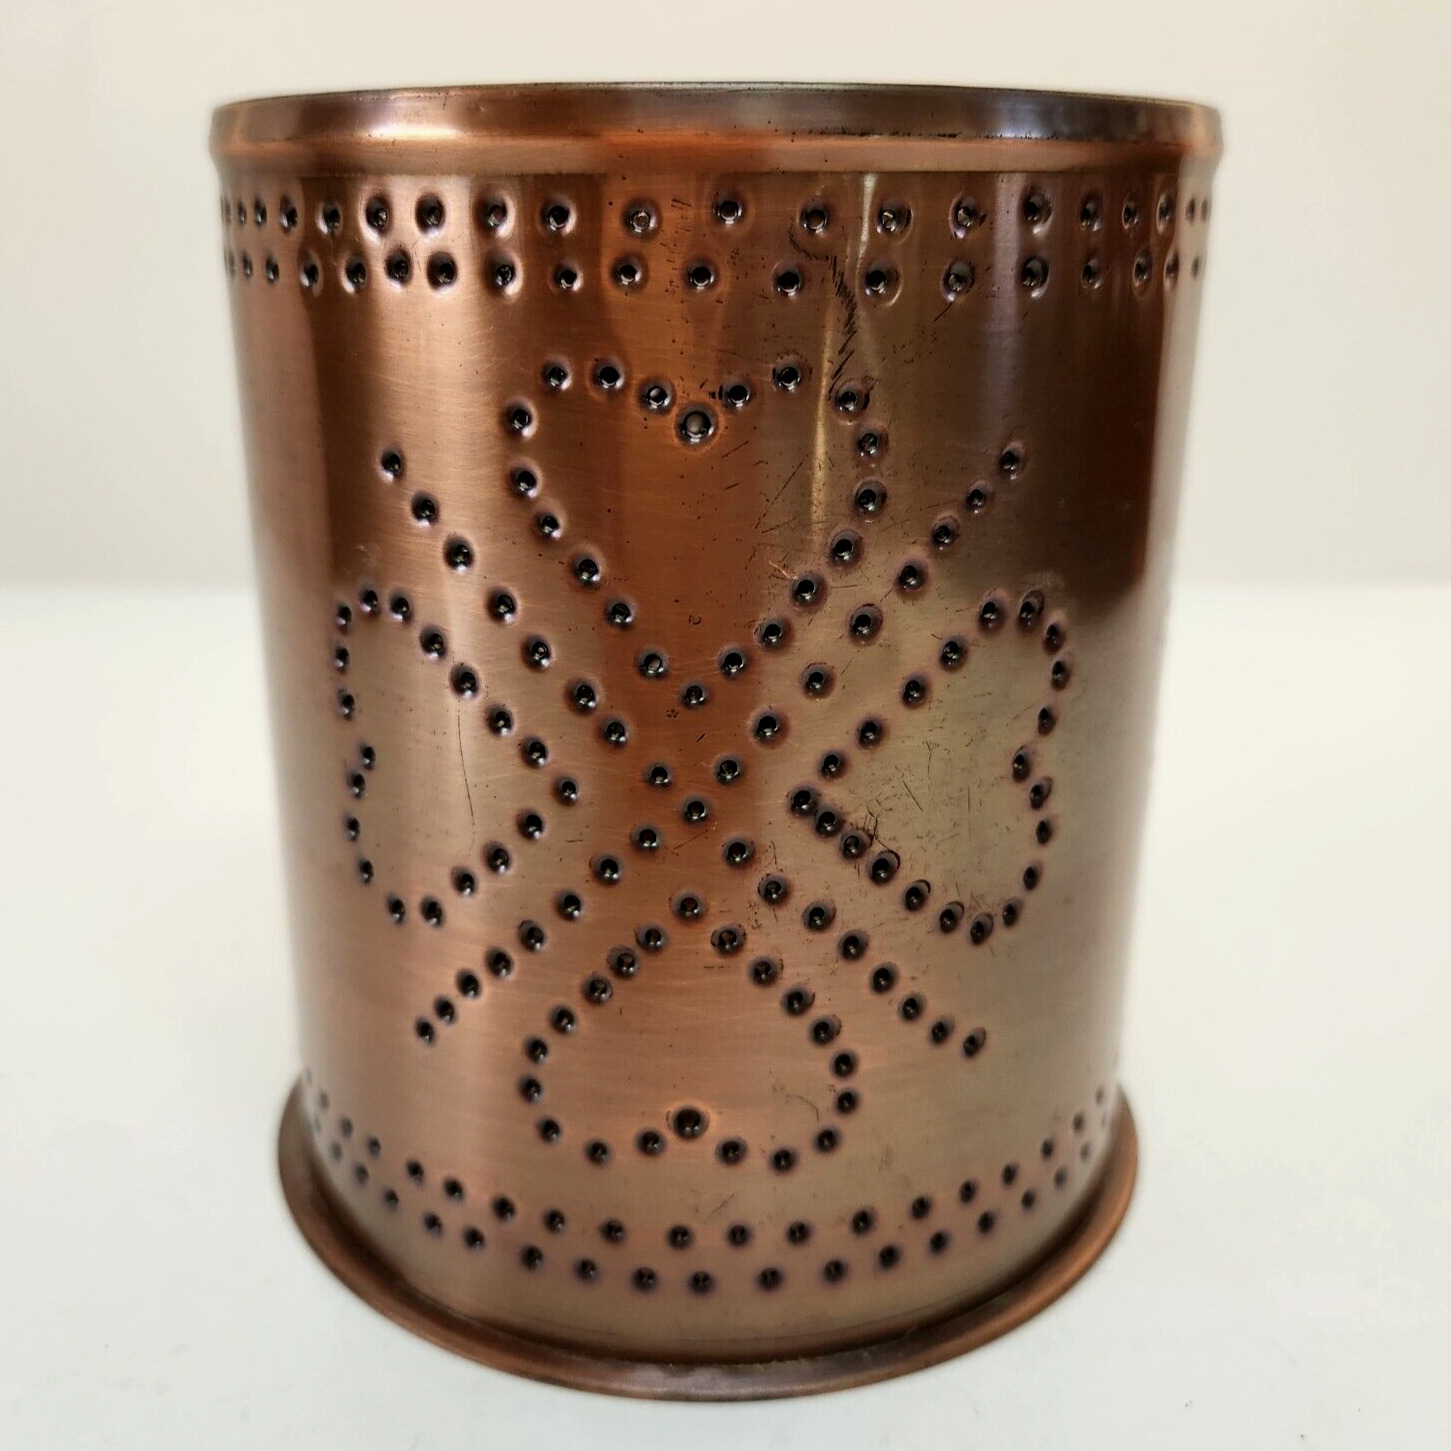 Irvin\'s Tinware Co. Punched Copper Candle Holder Solid Copper Clover Pattern